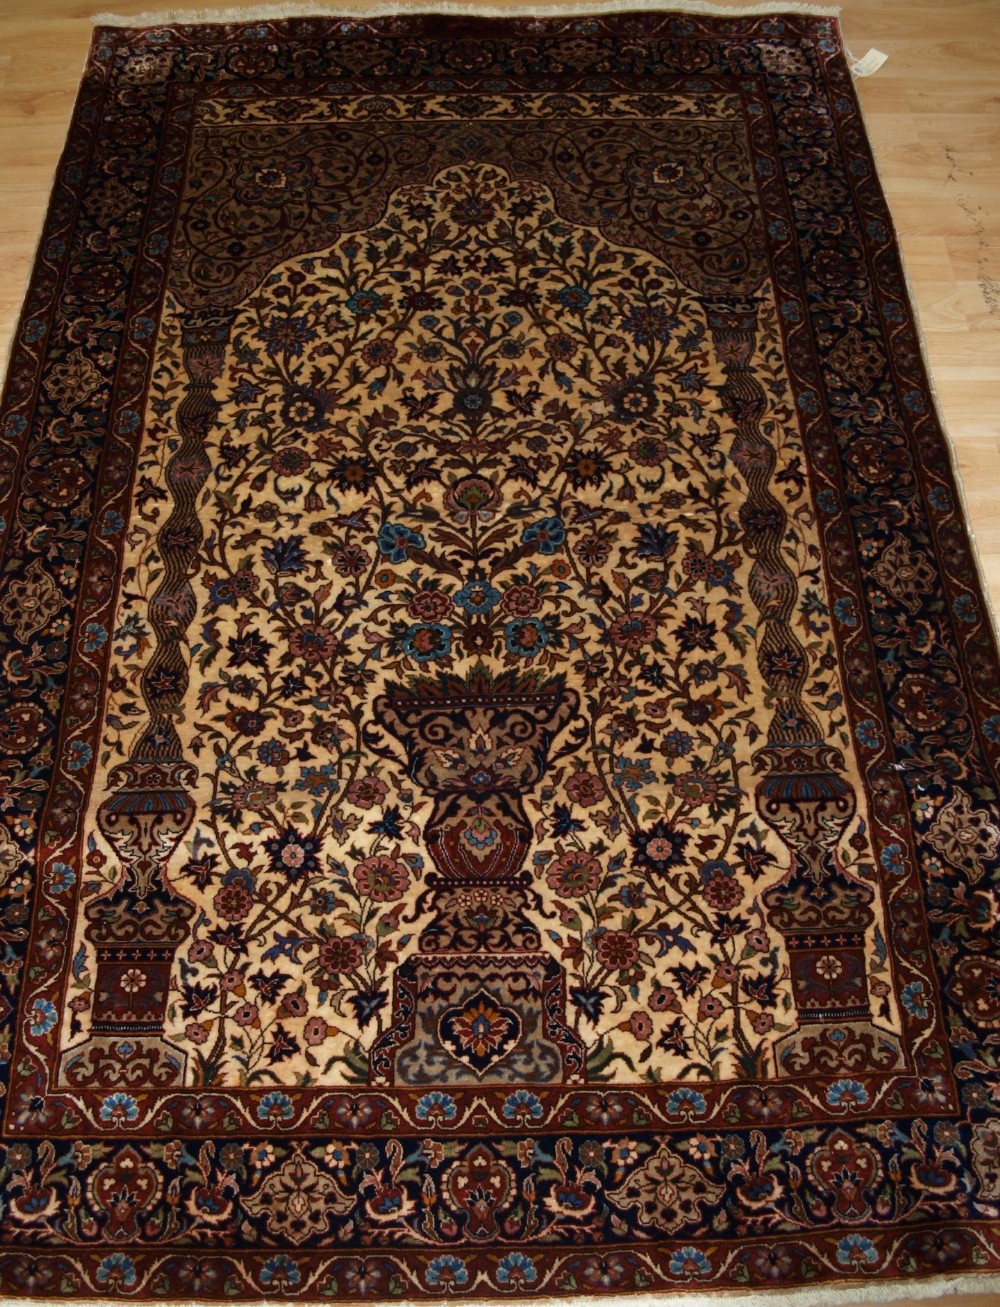 indian rug of classic isfahan vase prayer rug design about 30 years old